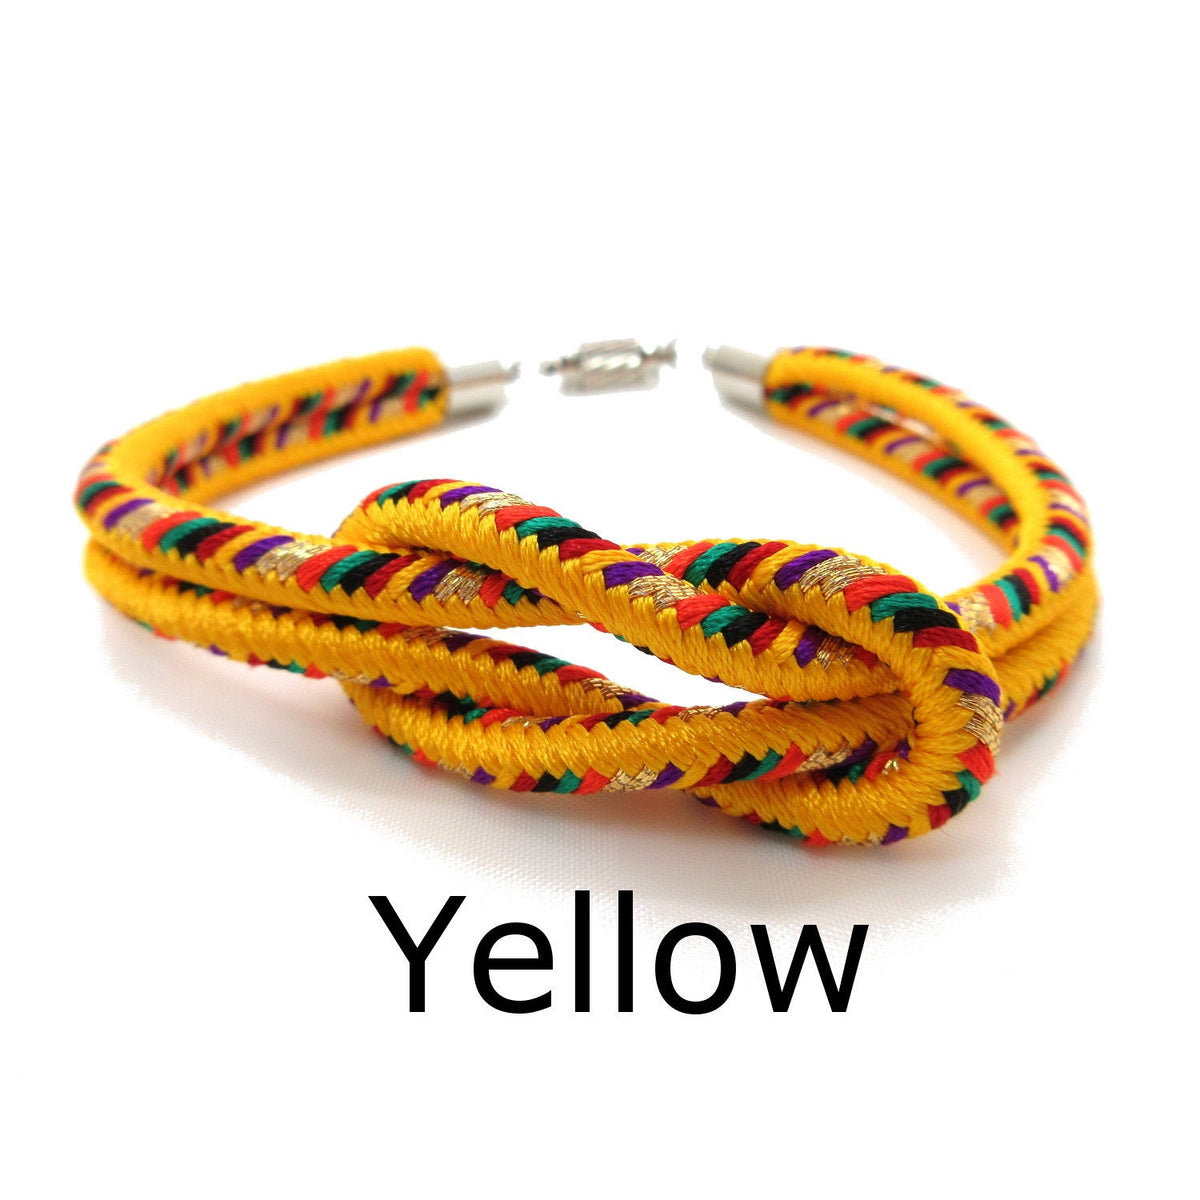 Kumihimo Leopard/cheetah Print Friendship Bracelets Available in 4 Shades  made to Order -  Denmark